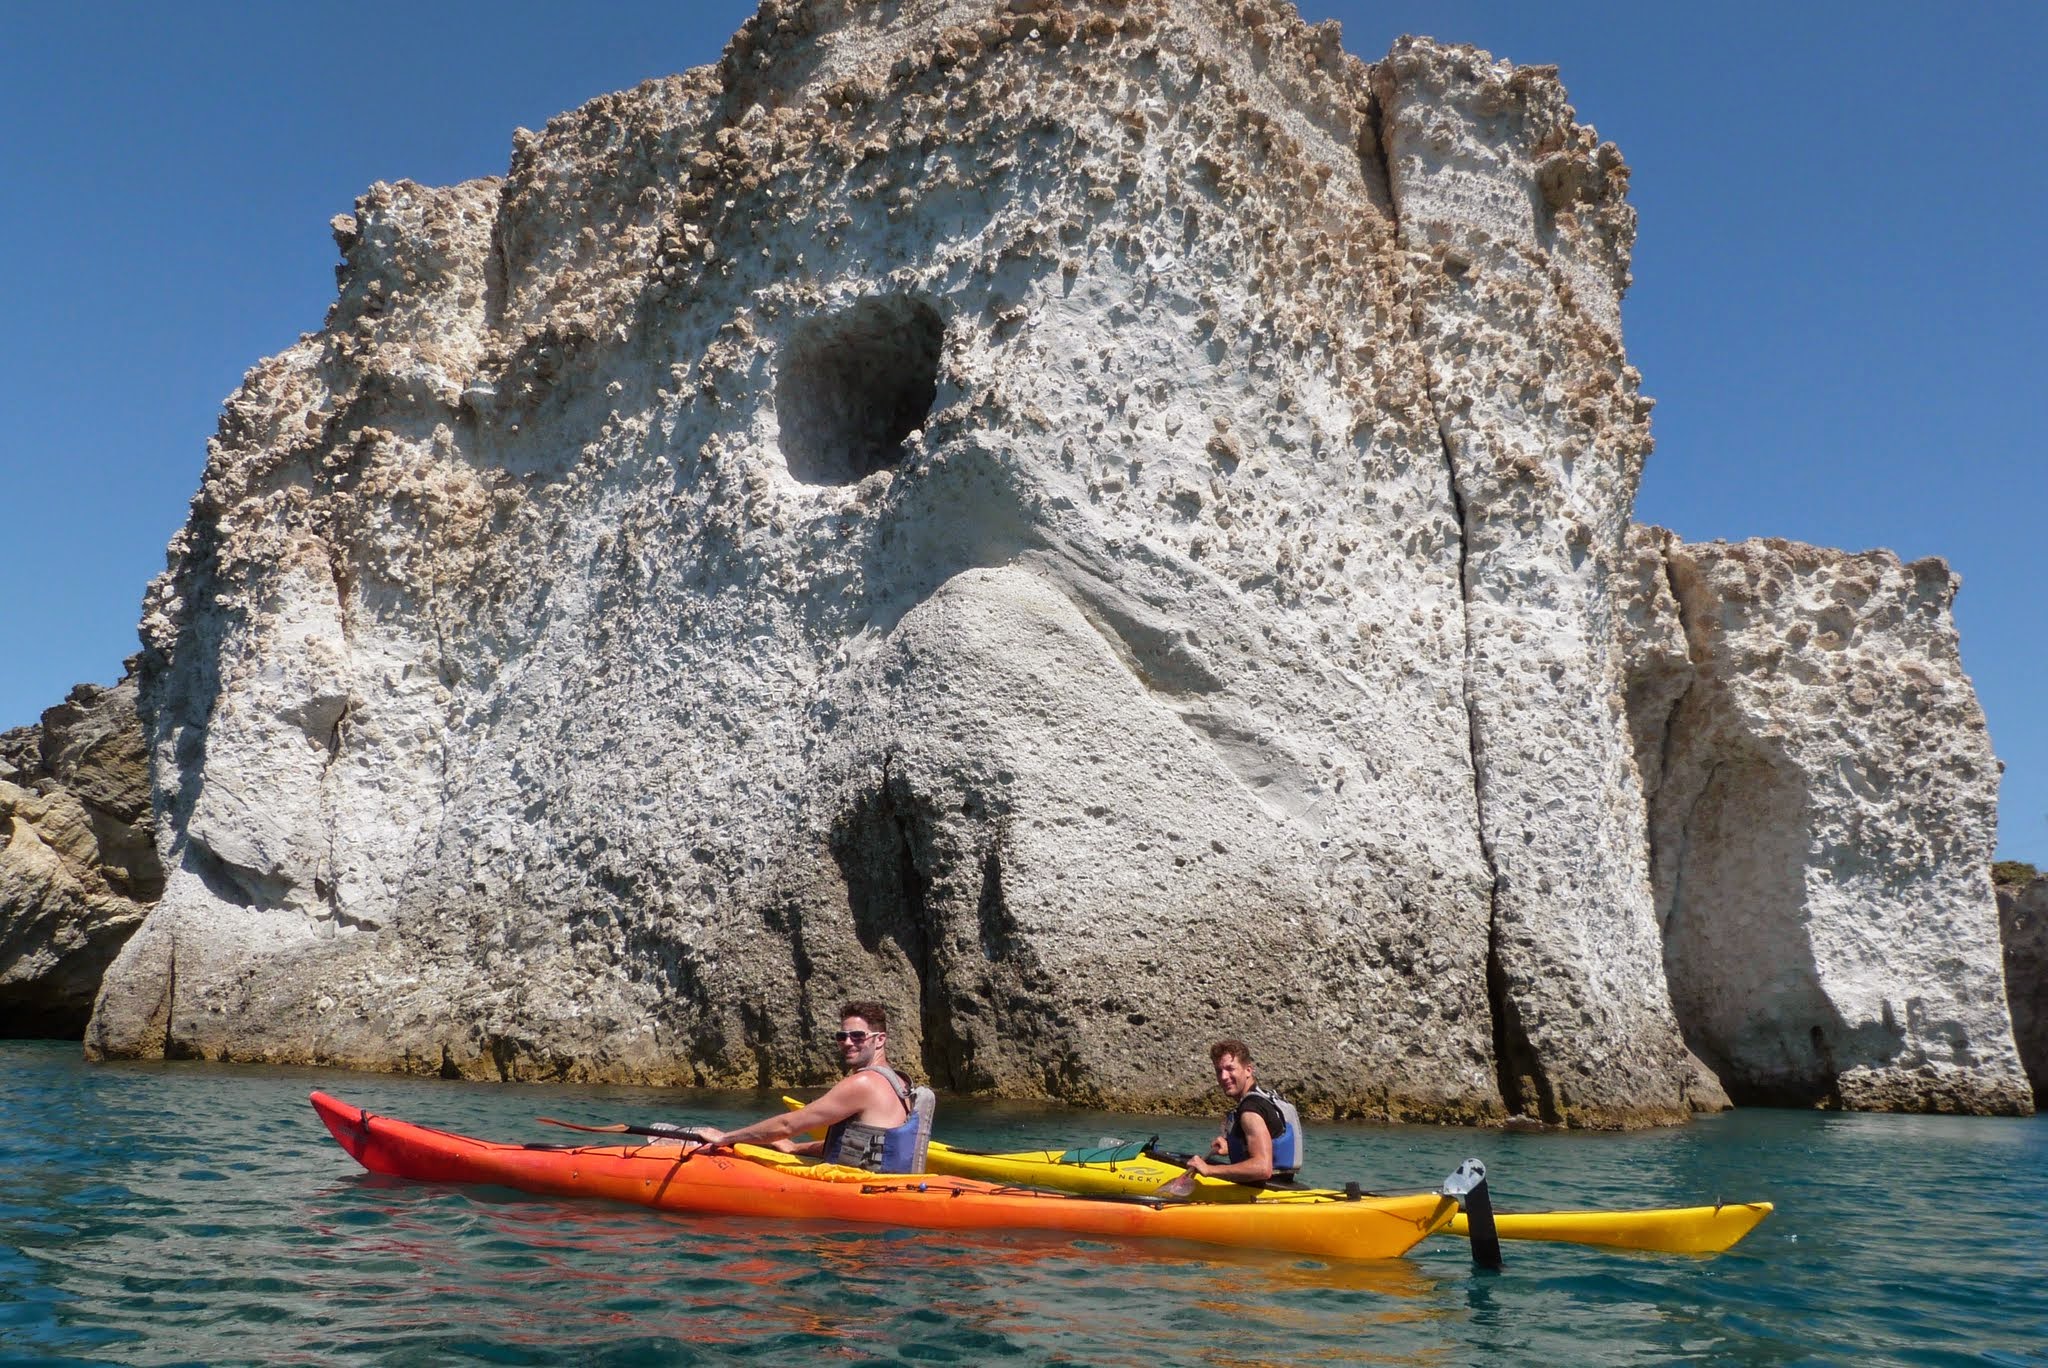  Kayaking in the sea caves of Greece. 